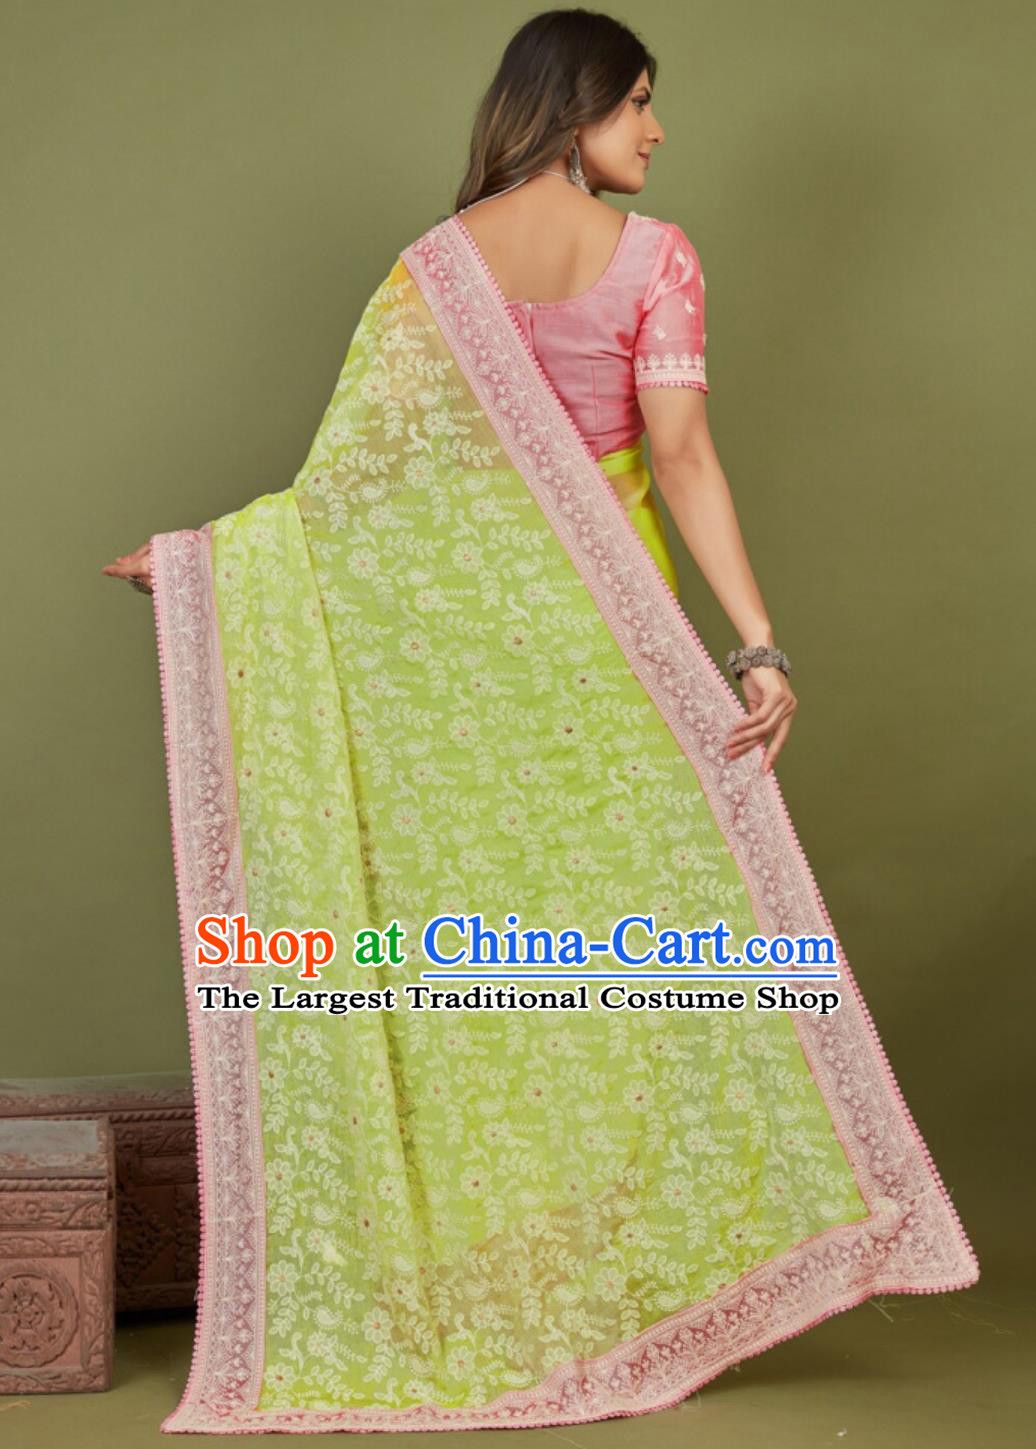 India Traditional Festival Green Embroidered Sari Dress Woman Summer Costume Indian National Clothing